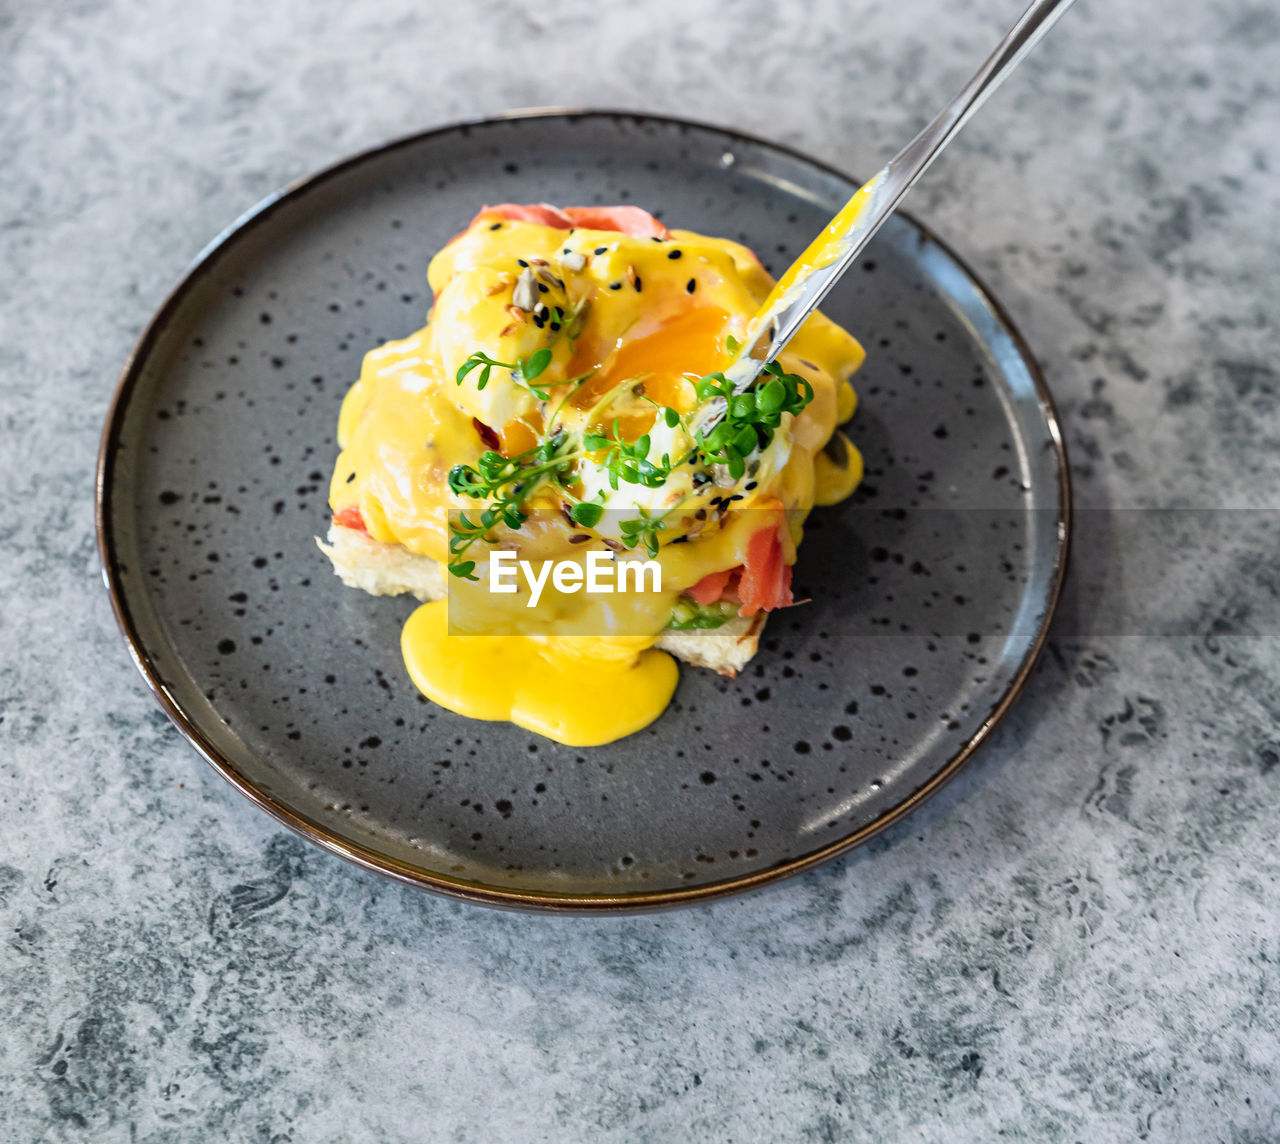 food and drink, food, healthy eating, egg, wellbeing, dish, freshness, kitchen utensil, meal, plate, eating utensil, egg yolk, produce, breakfast, fried, vegetable, indoors, high angle view, no people, fried egg, fork, cuisine, yellow, gray, garnish, close-up, spoon